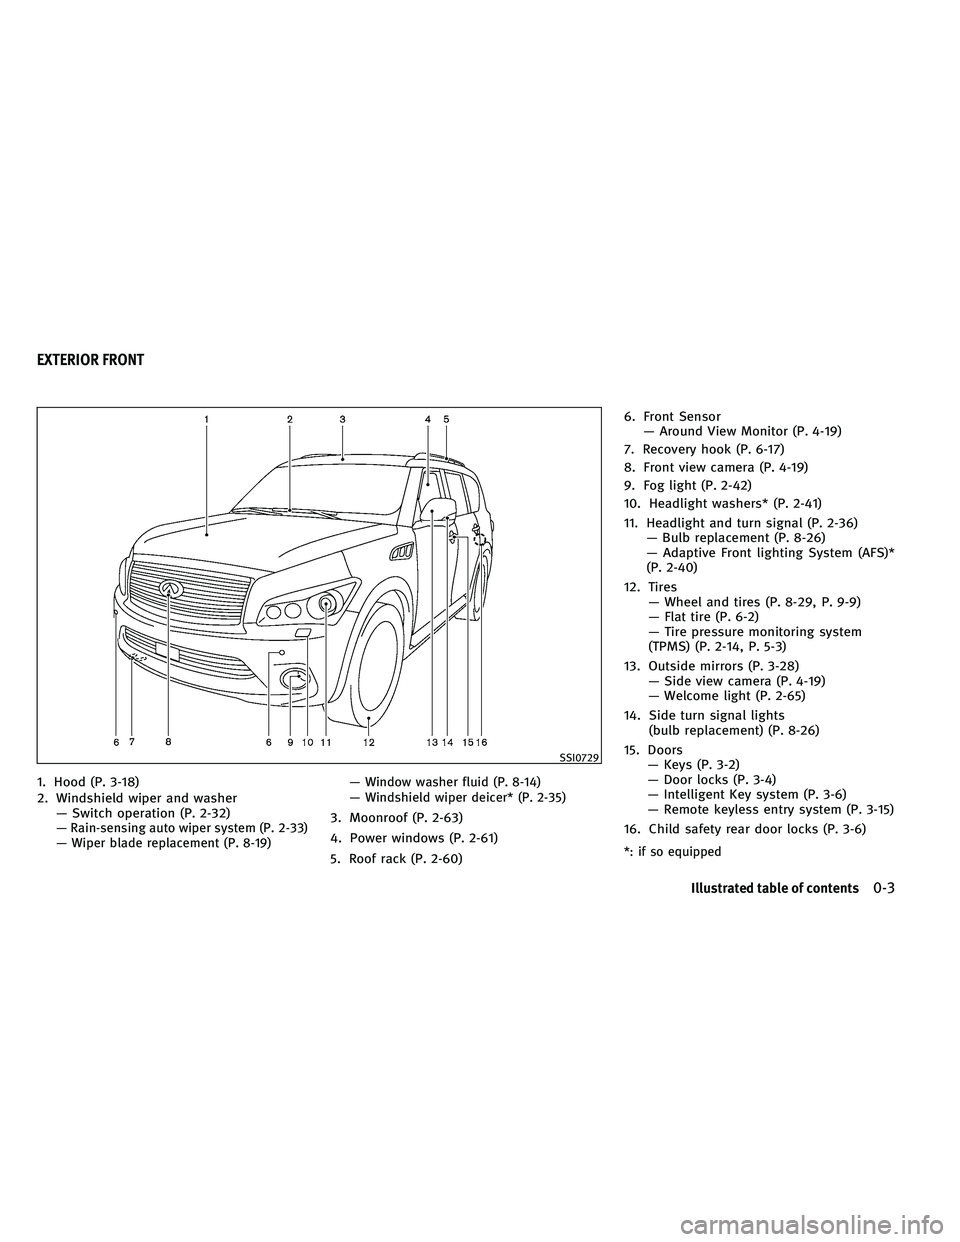 INFINITI QX 2011  Owners Manual 1. Hood (P. 3-18)
2. Windshield wiper and washer— Switch operation (P. 2-32)
— Rain-sensing auto wiper system (P. 2-33)
— Wiper blade replacement (P. 8-19) — Window washer fluid (P. 8-14)
— 